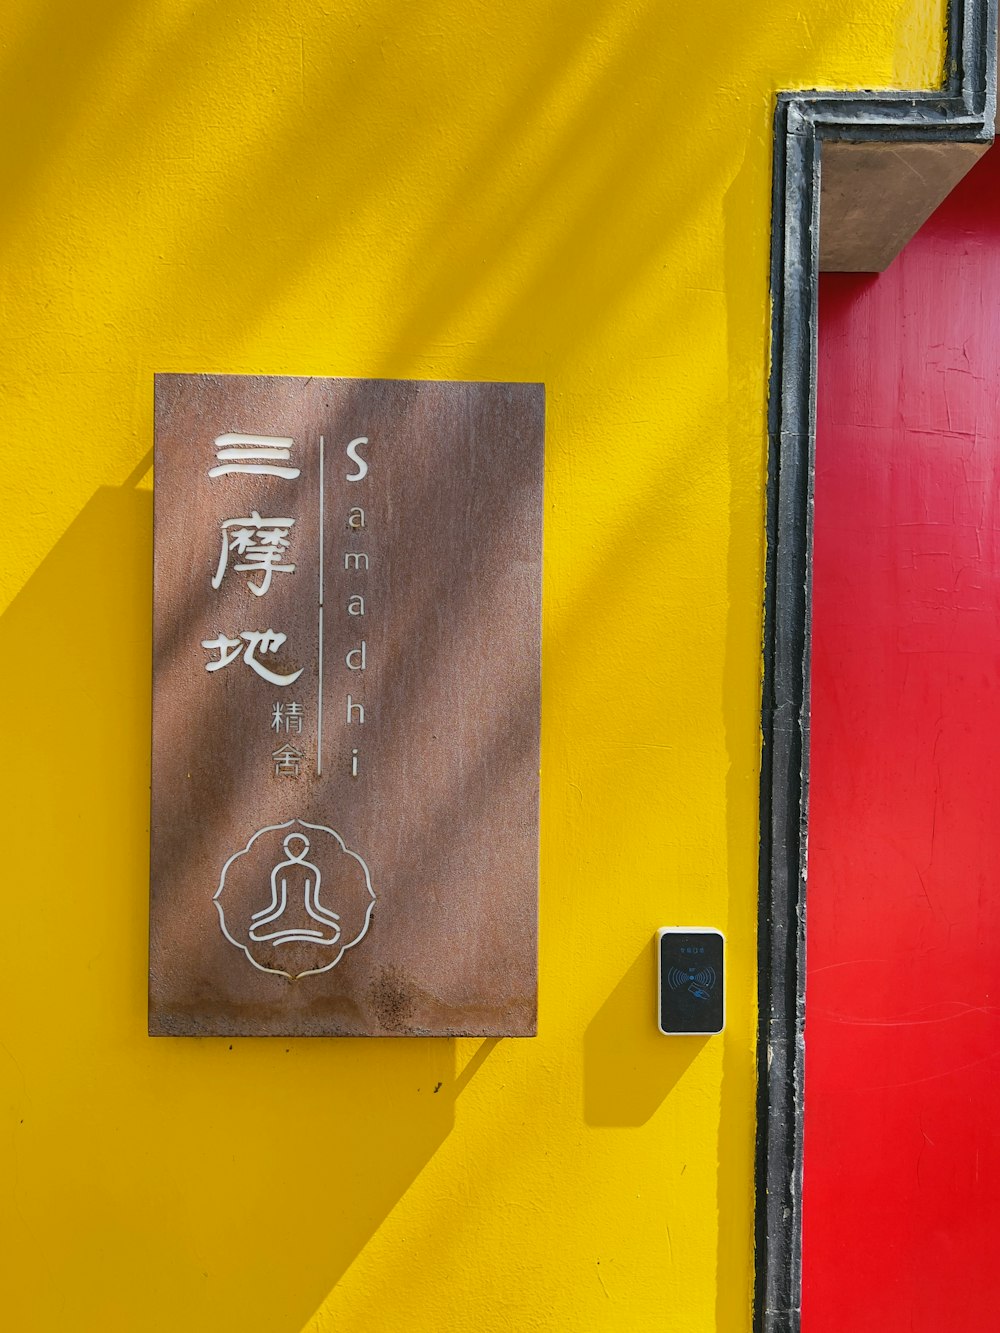 a sign on the side of a yellow building